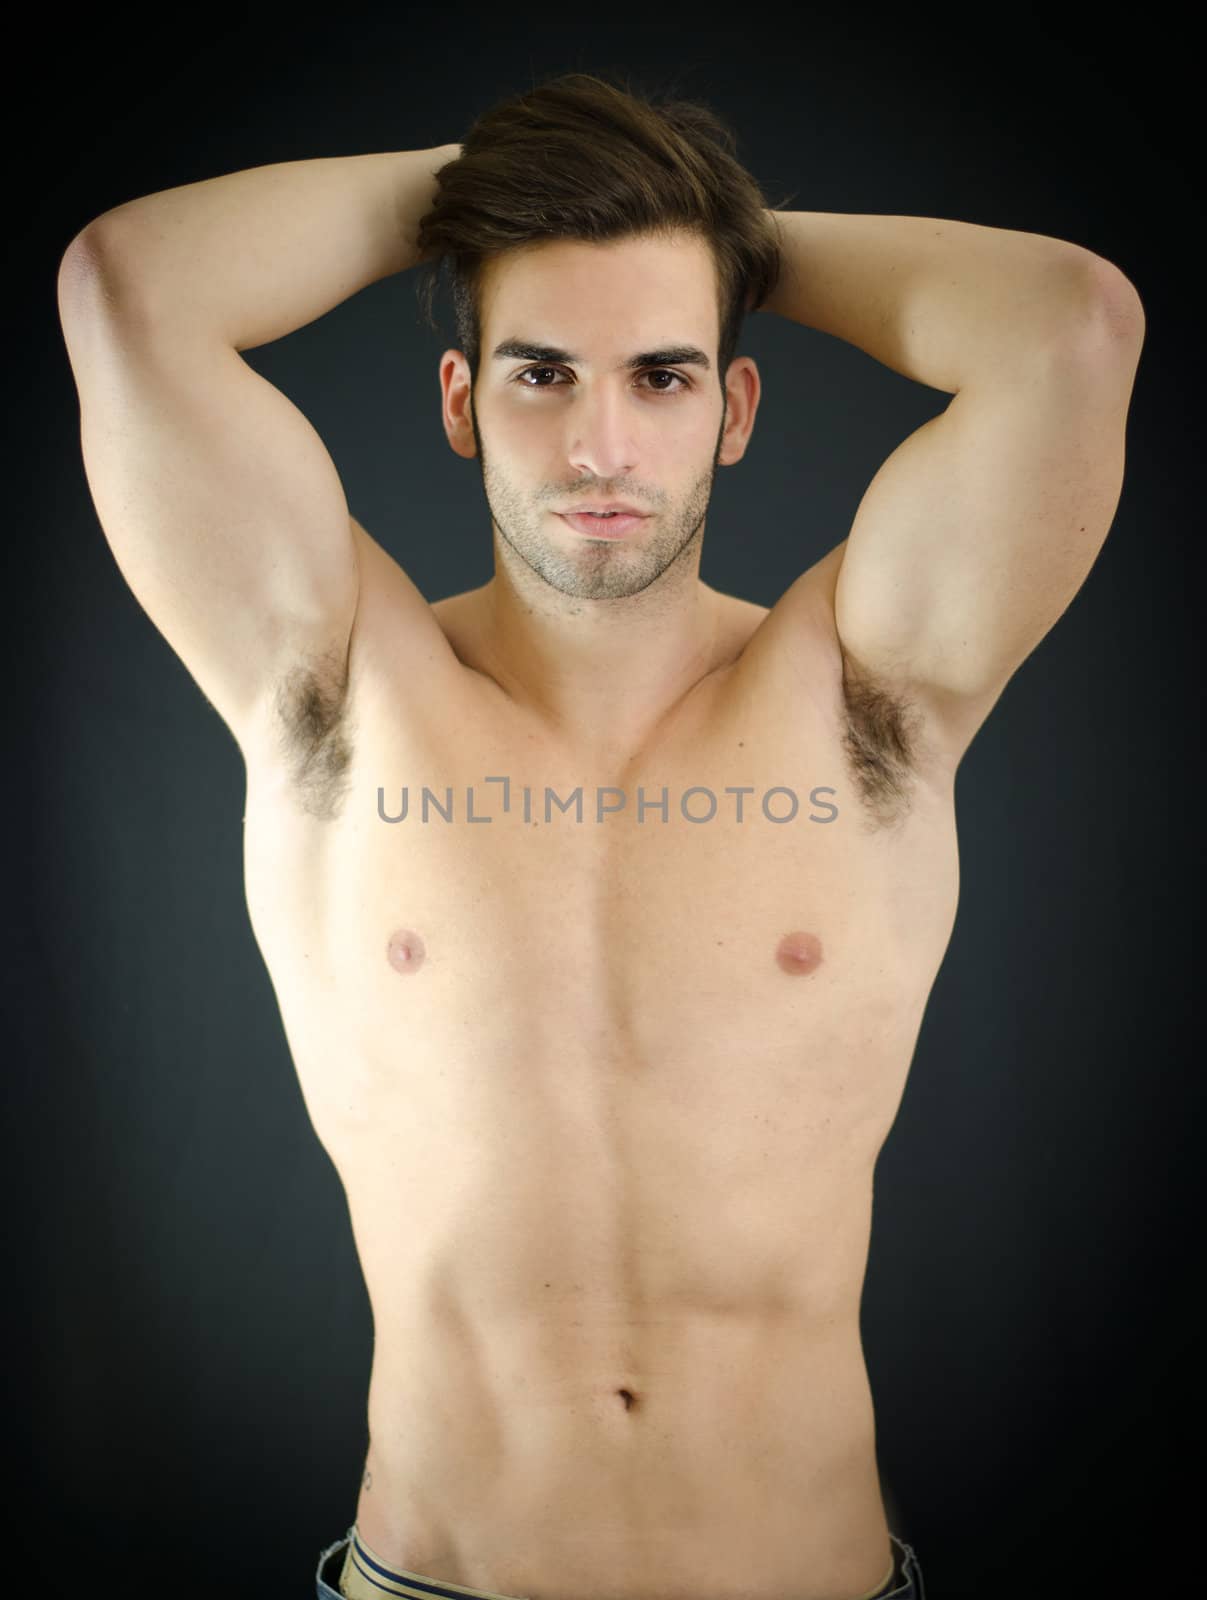 Sexy shirtless young man with arms up behind his head, showing muscular torso, pecs and abs